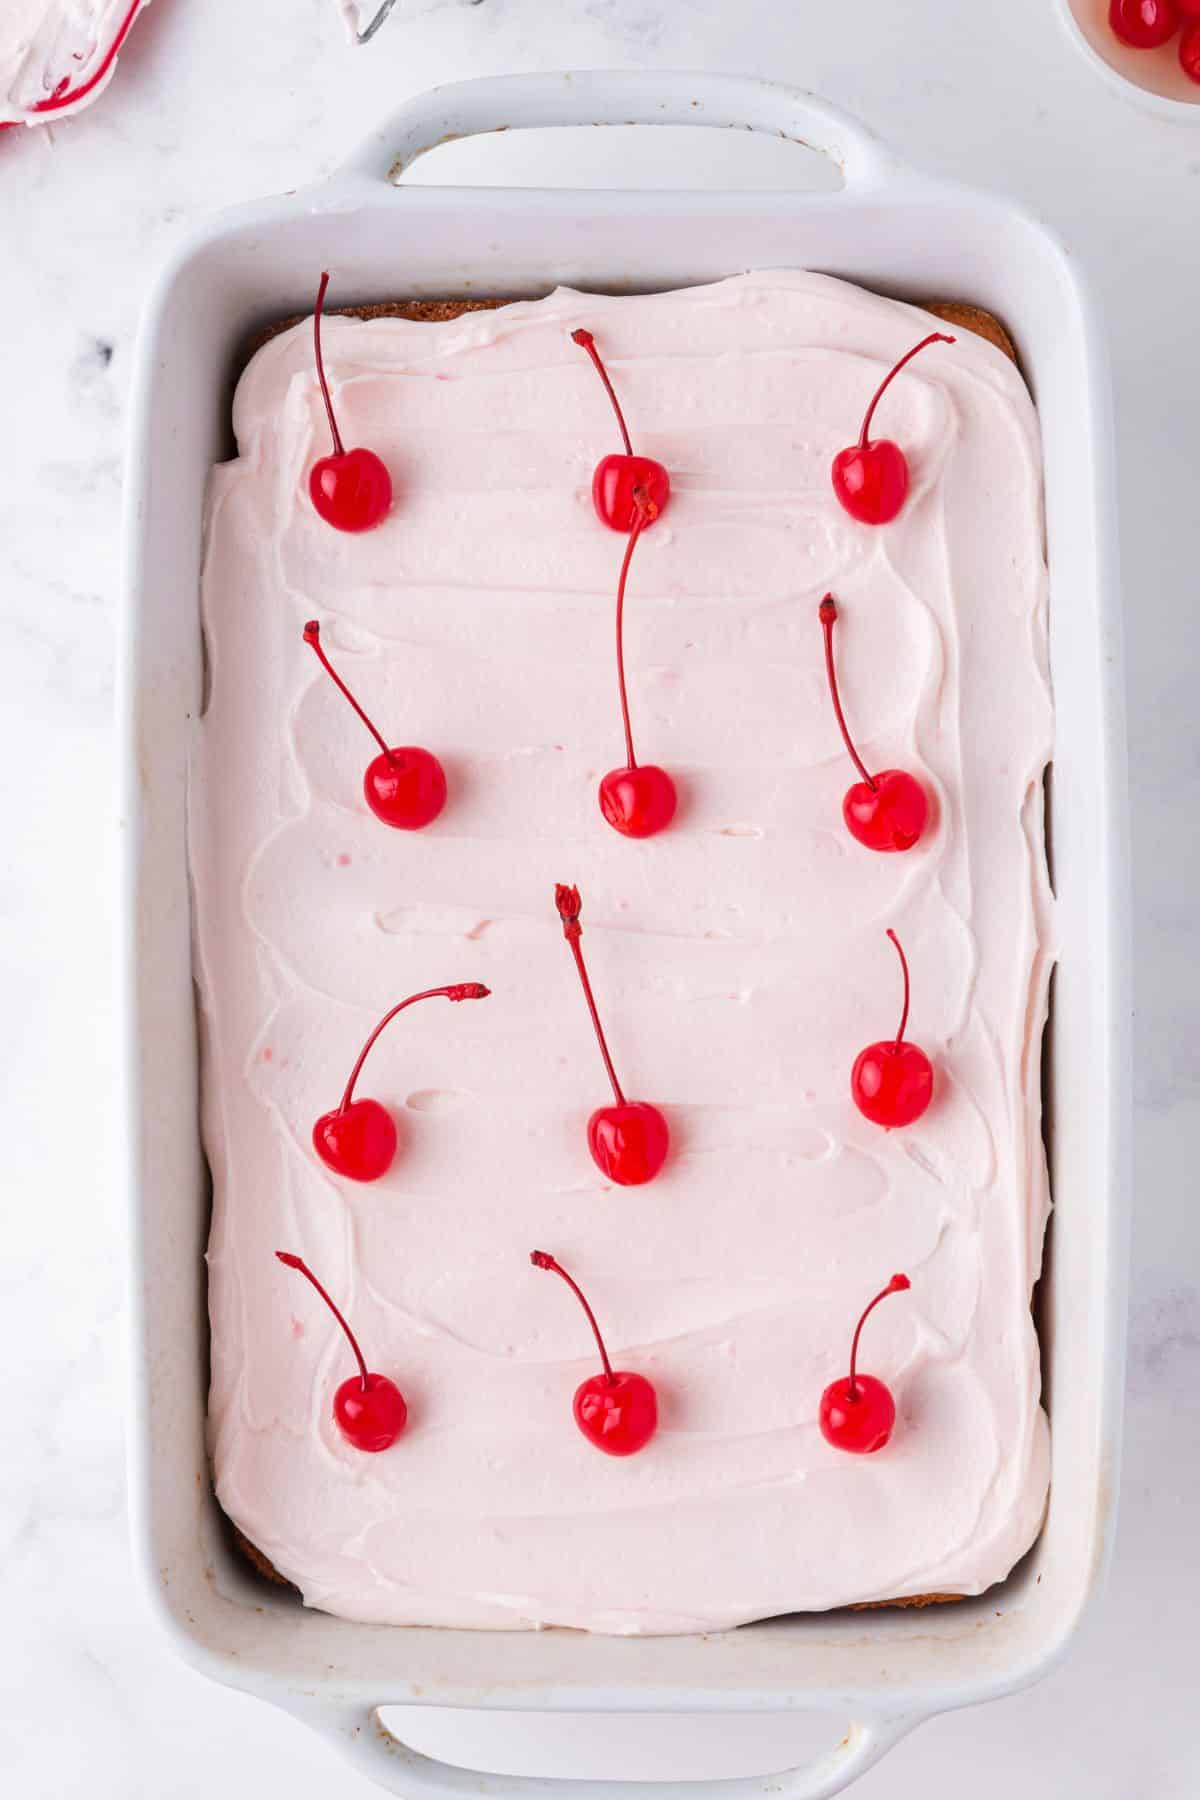 top down of frosted cake with cherries in rows on top